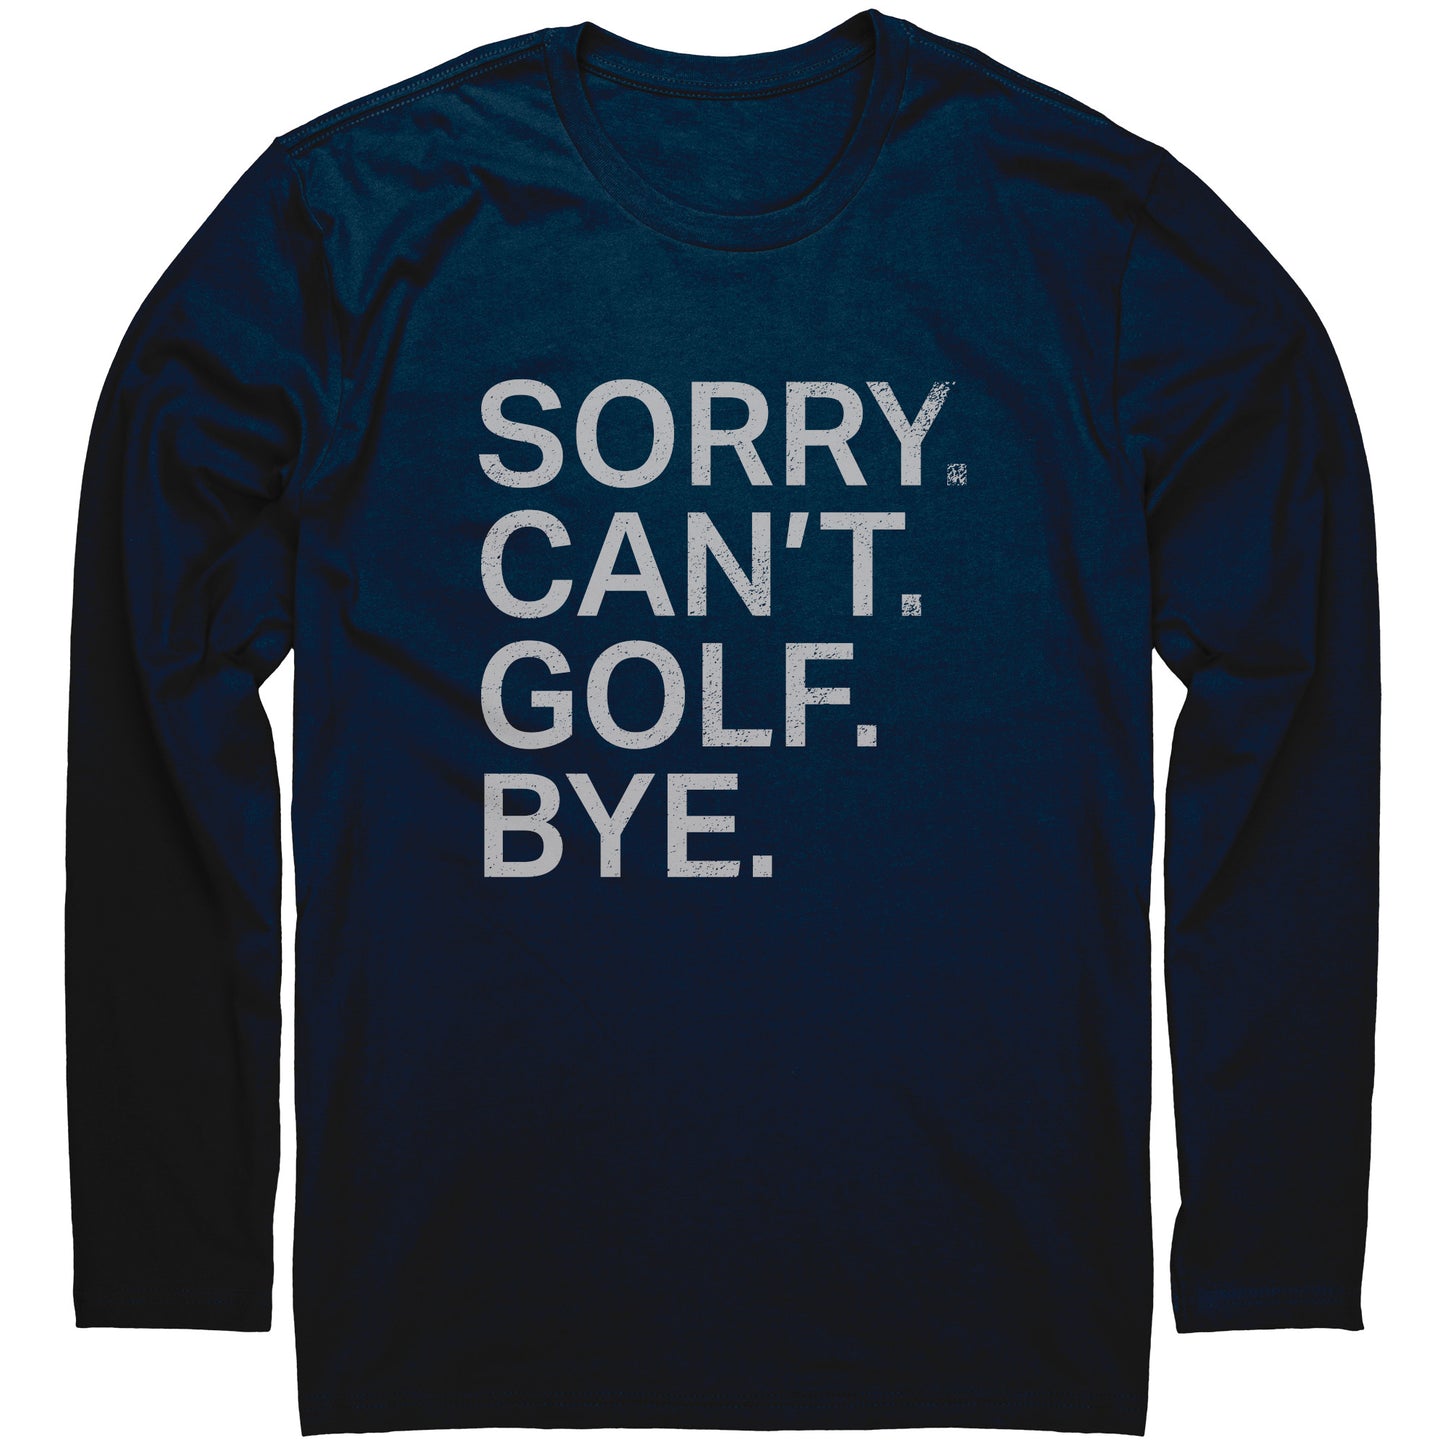 Sorry. Can't. Golf. Bye. Long-Sleeve T-Shirt.